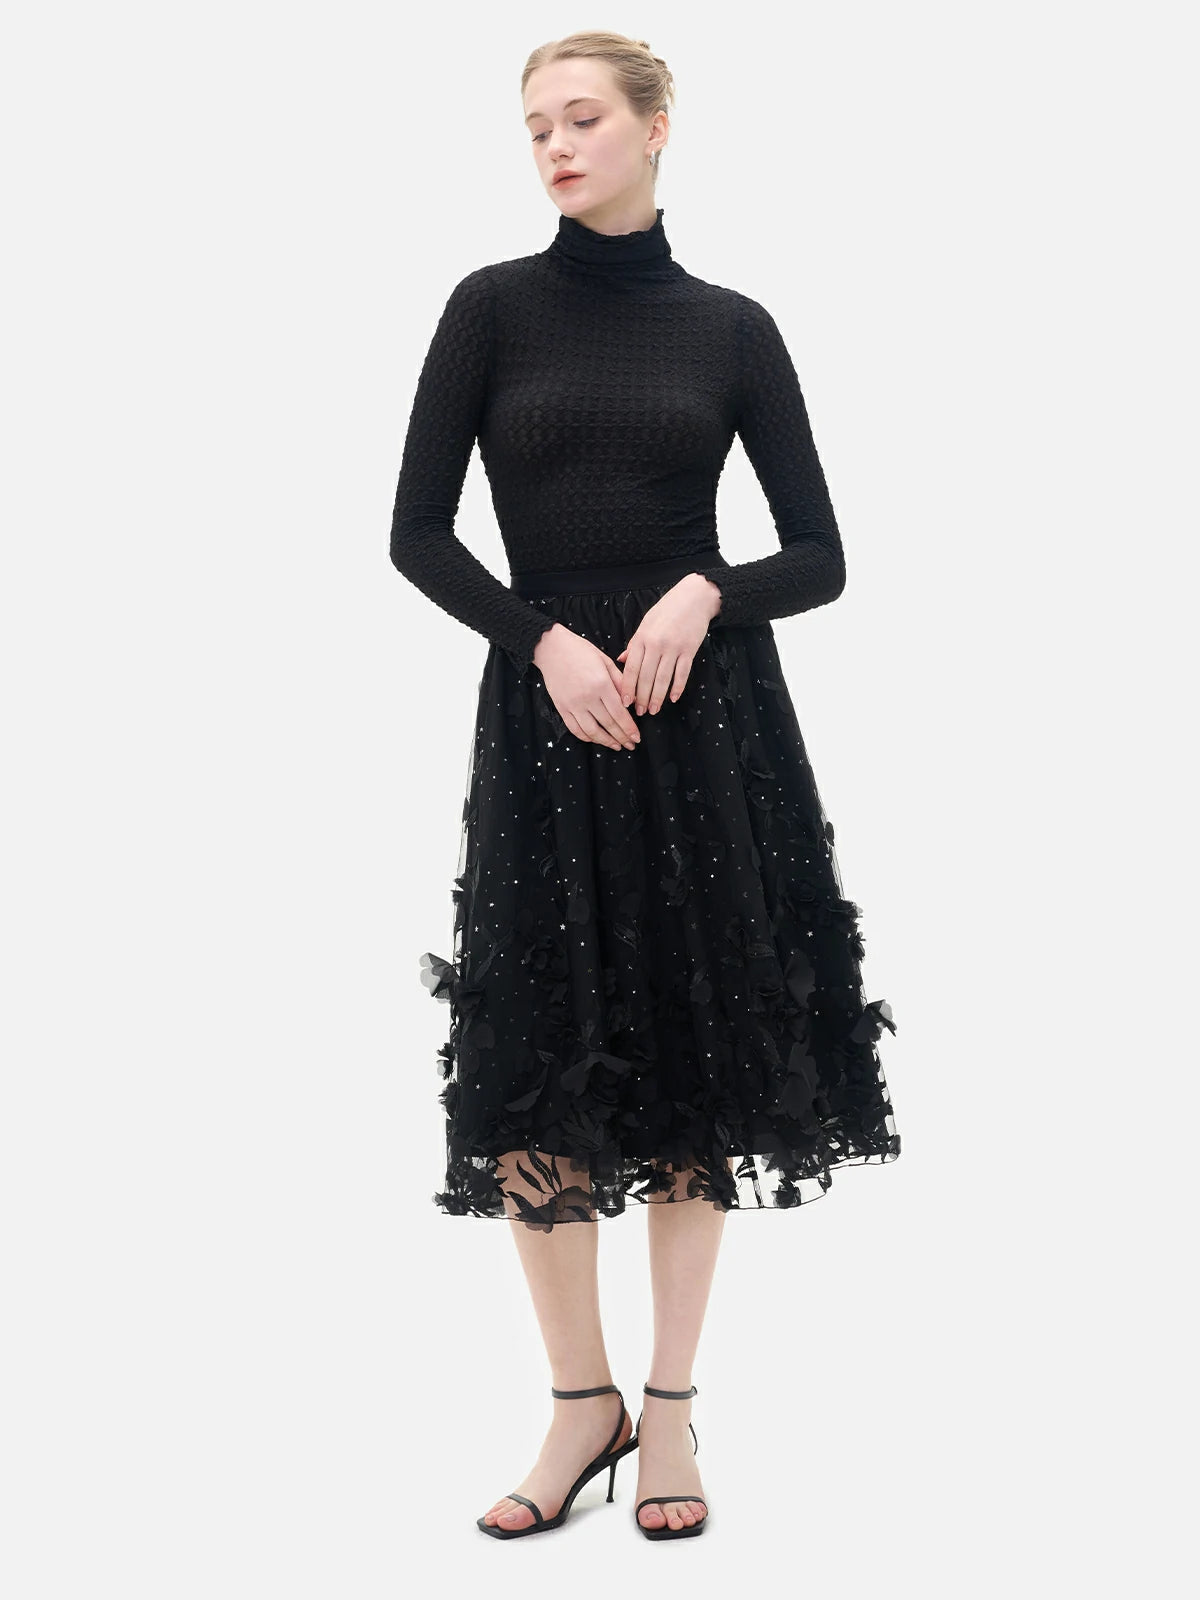 A classic yet stylish choice, this black double-layered skirt with intricate details is ideal for expressing individuality with sophistication.